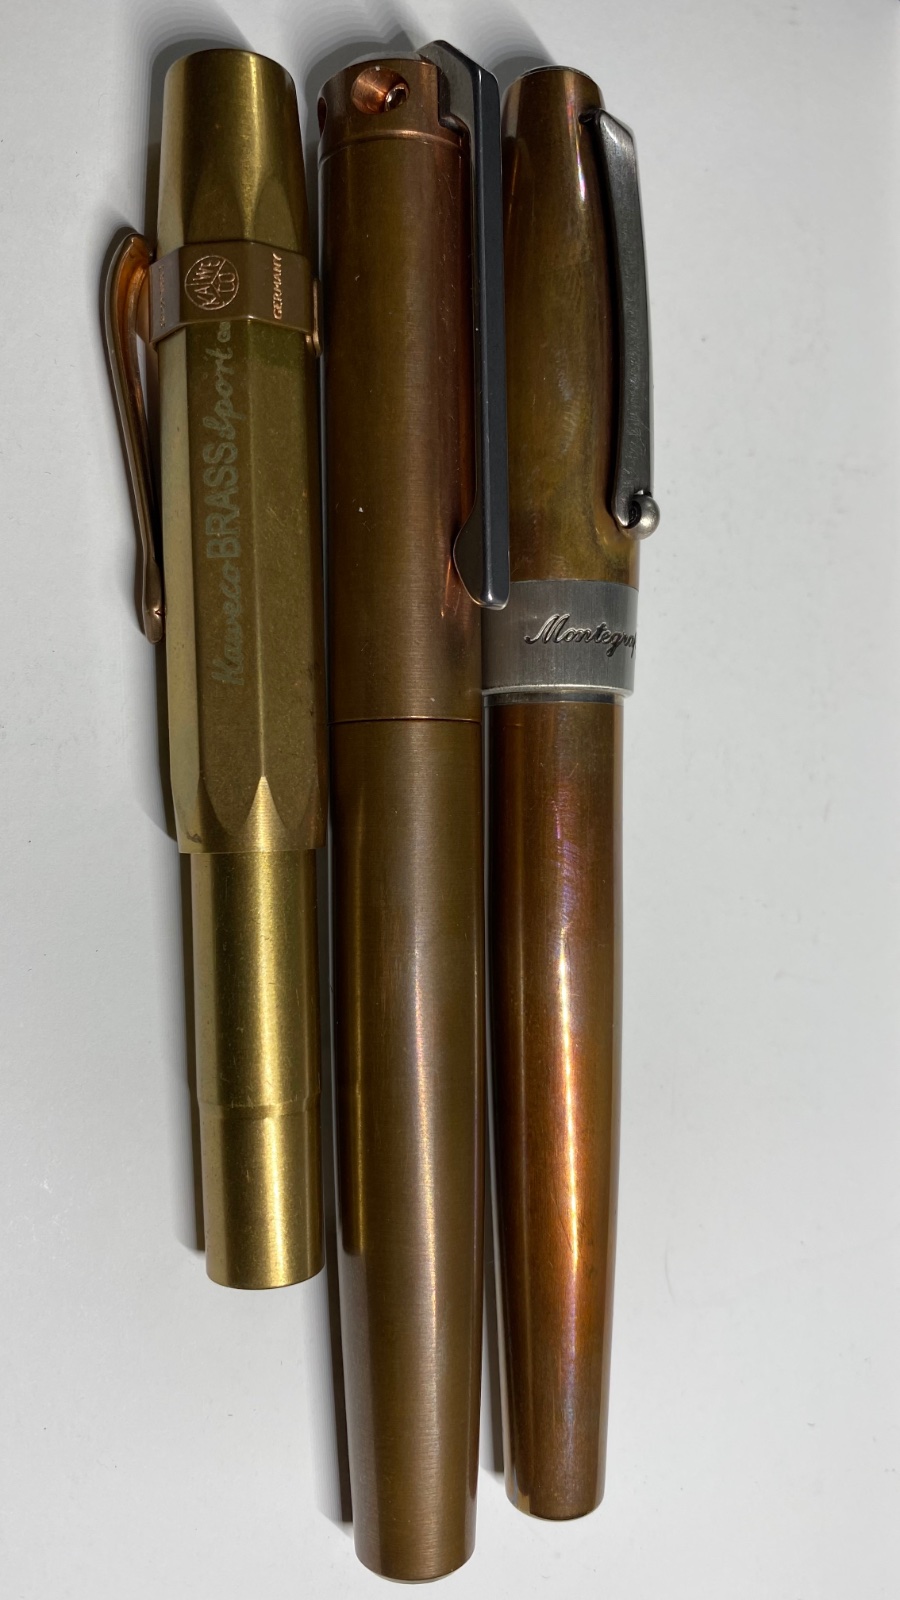 Kaweco Brass Patina / Oxidation at about 20 months : r/fountainpens